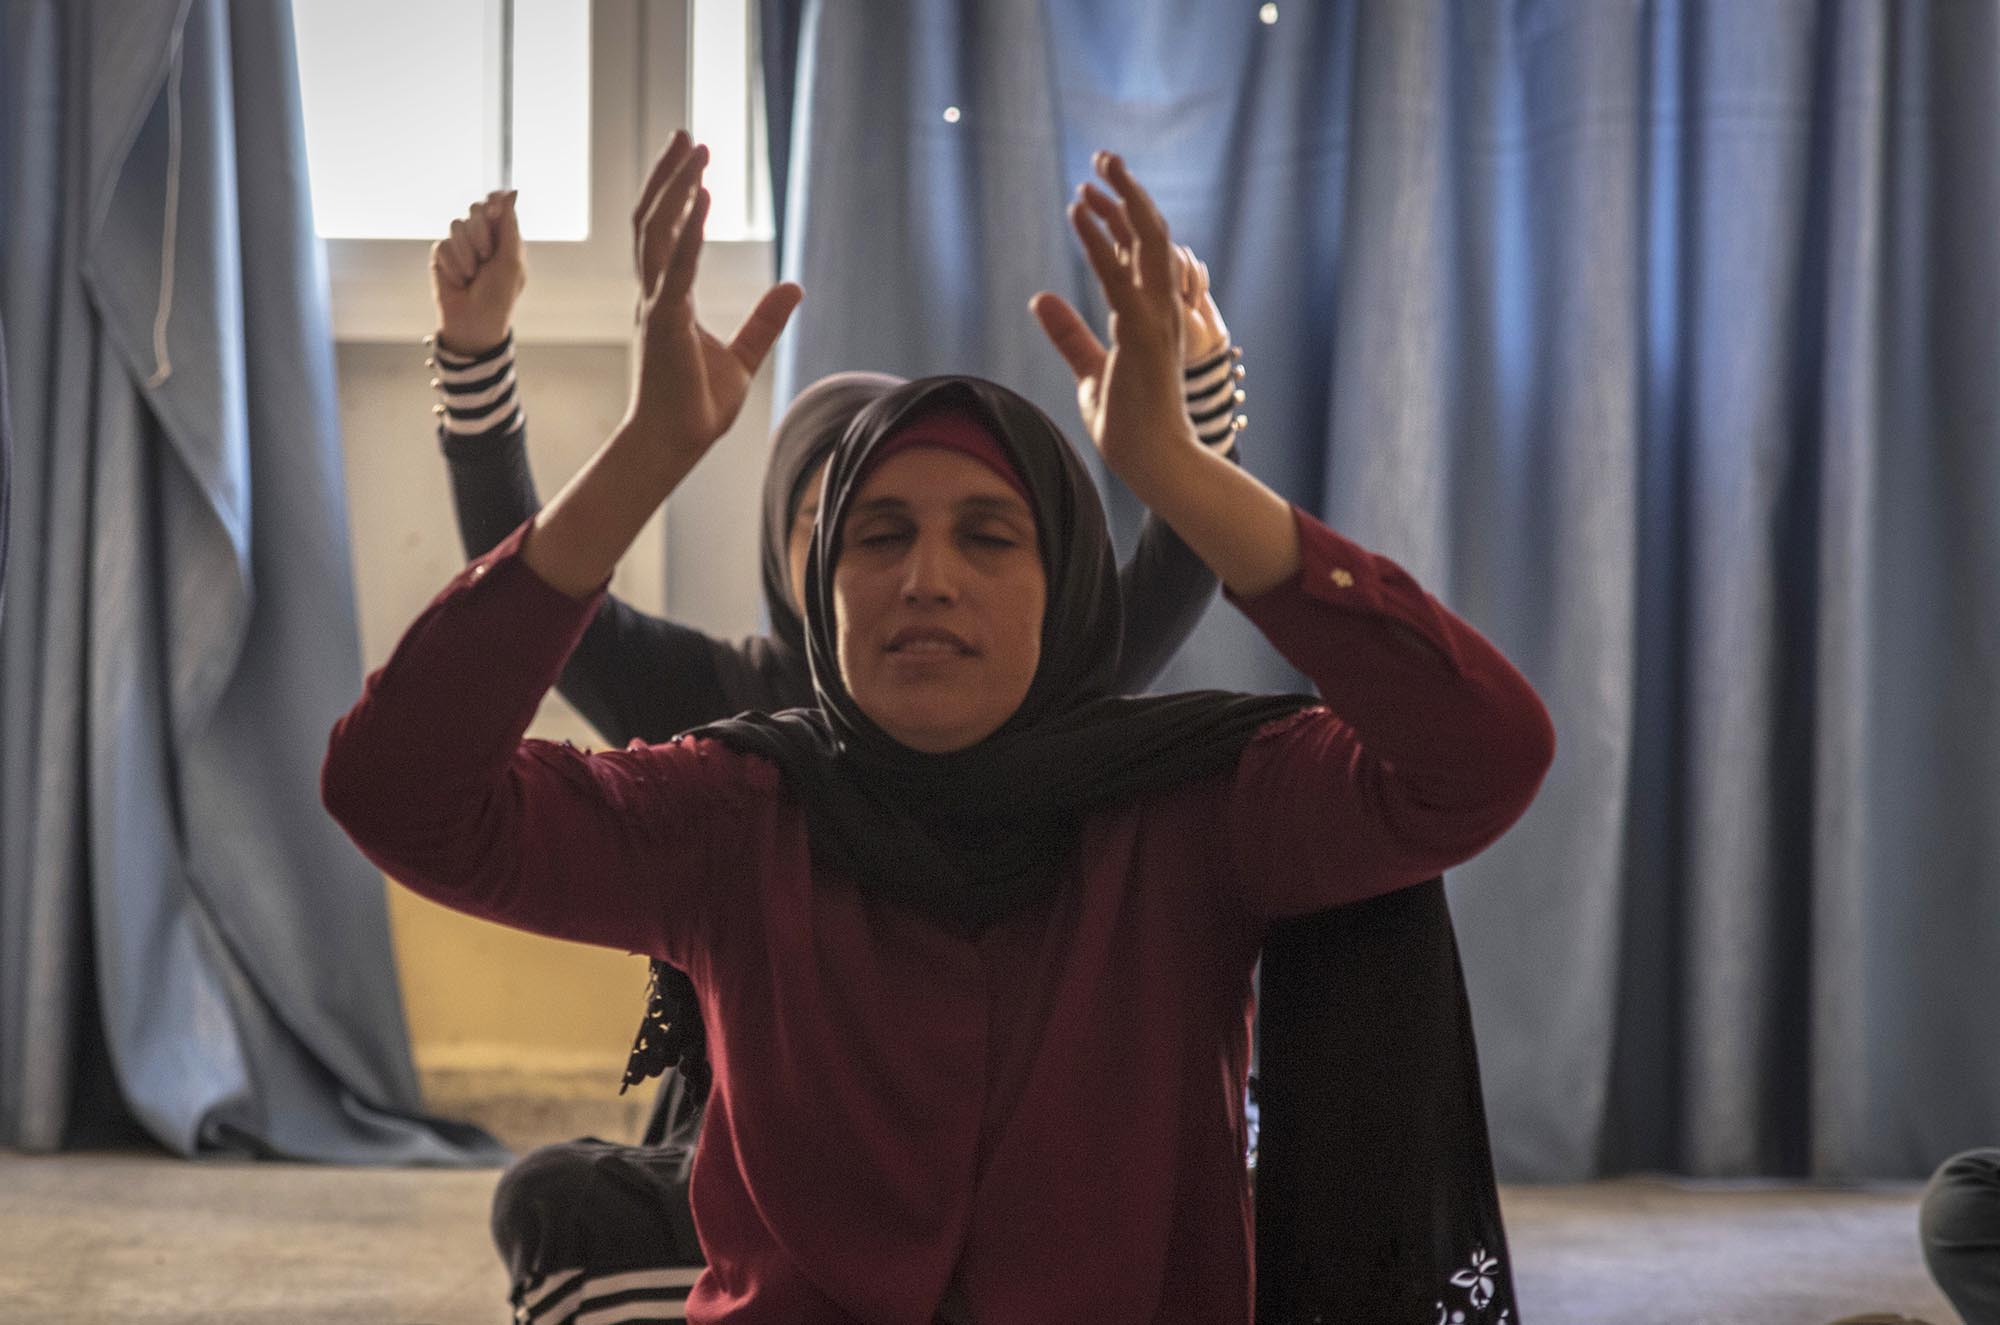 A young refugee woman takes yoga class in Lebanon.